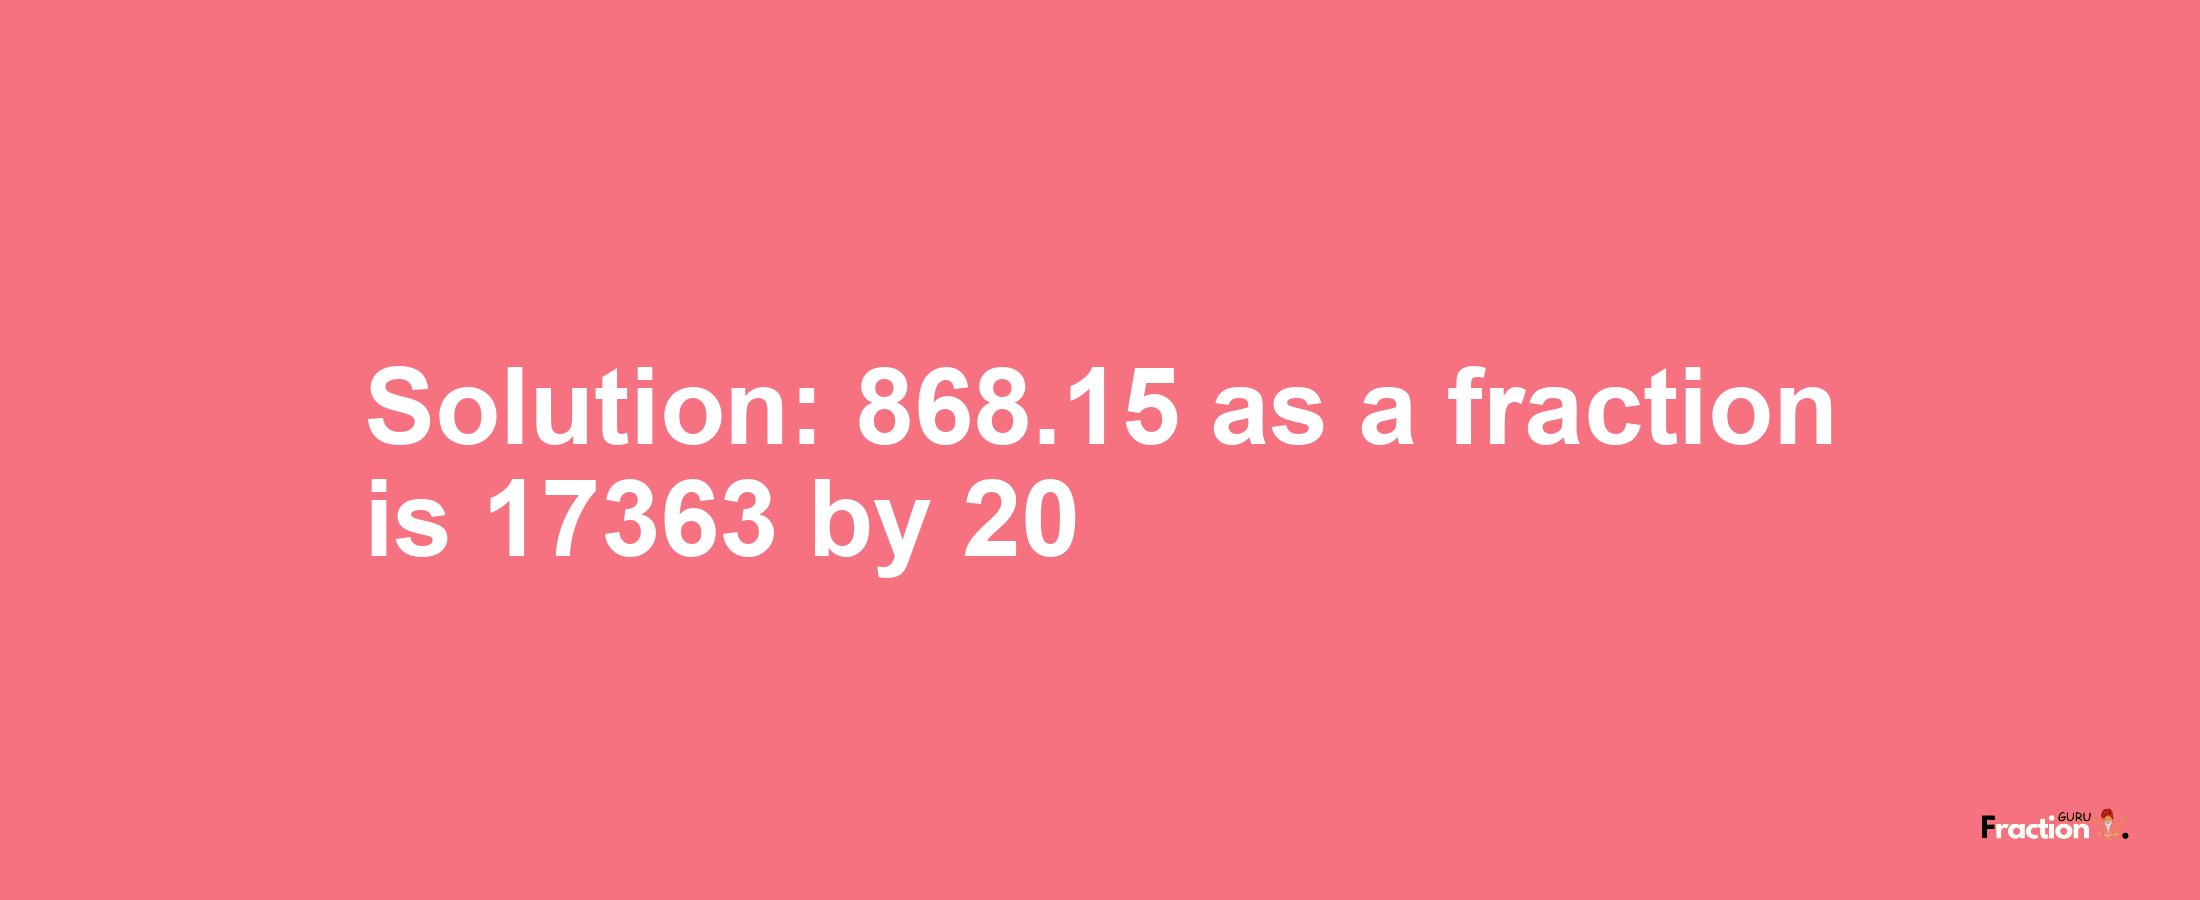 Solution:868.15 as a fraction is 17363/20